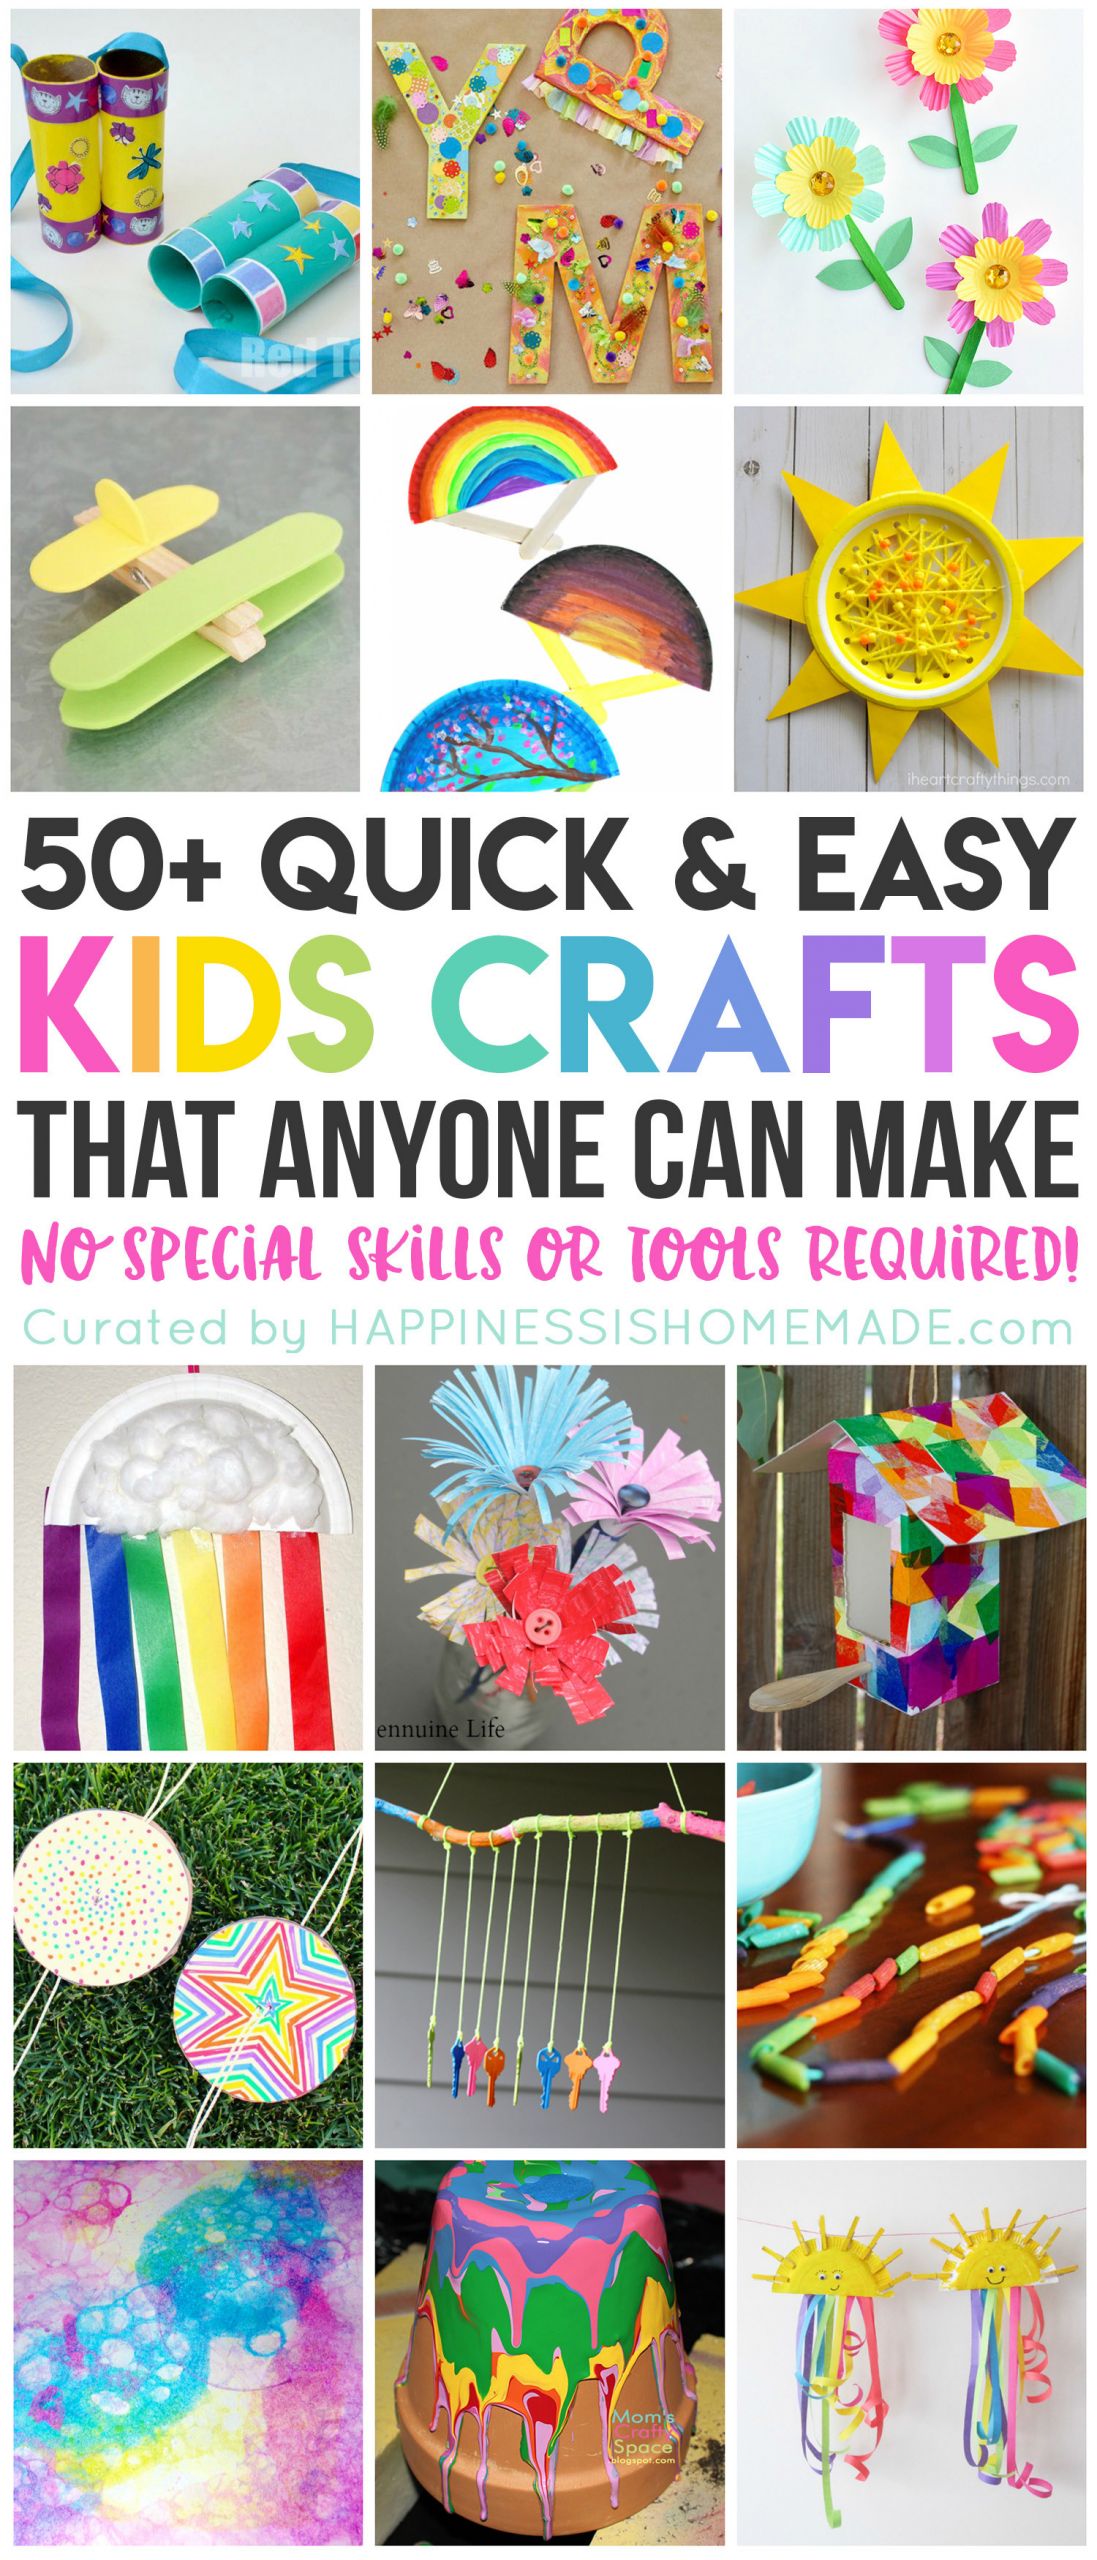 Easy Projects For Kids
 50 Quick & Easy Kids Crafts that ANYONE Can Make